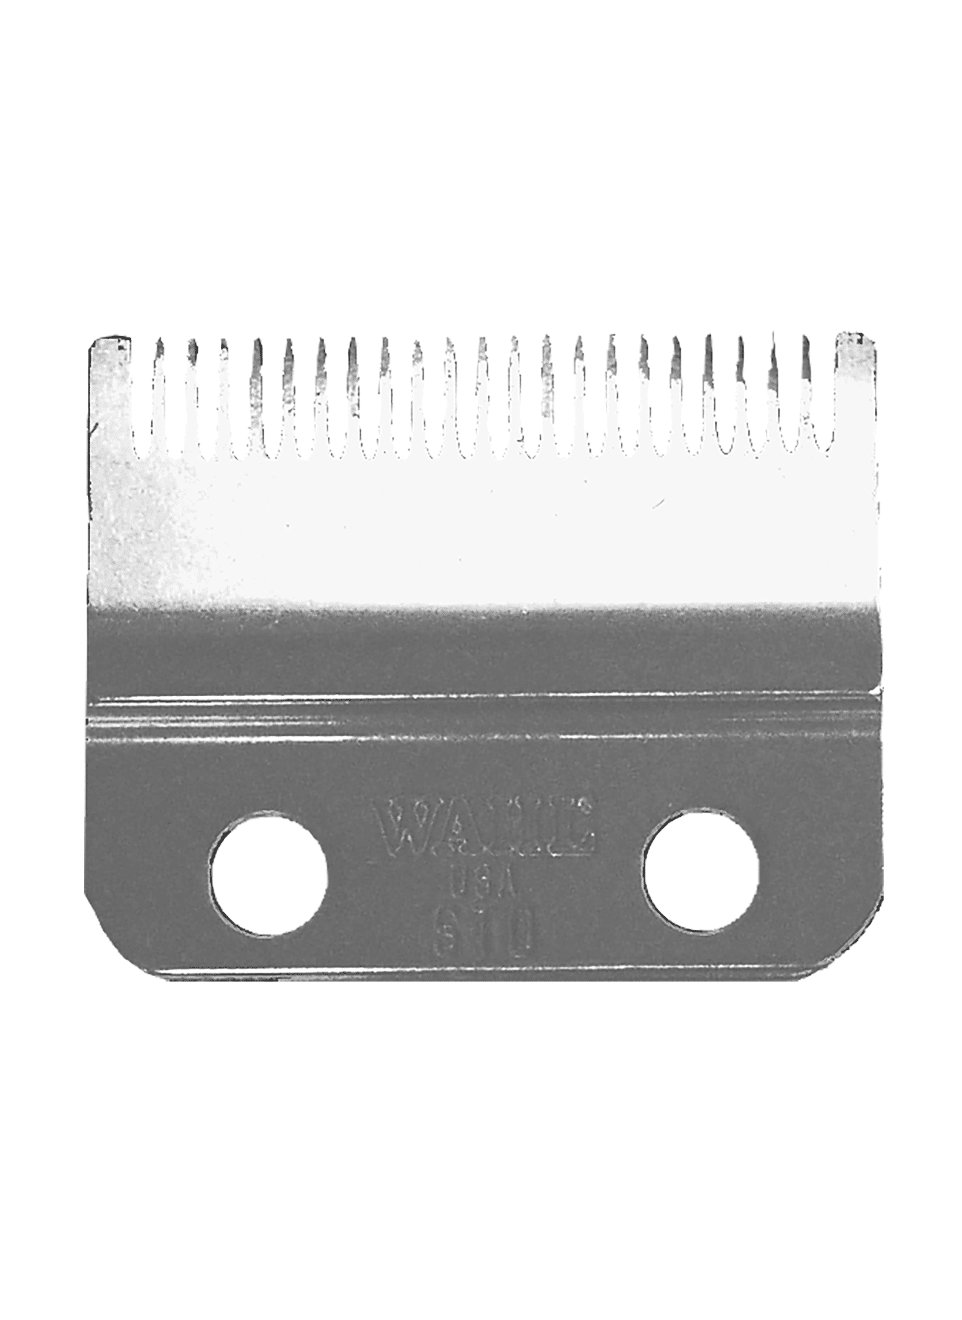 staggered tooth blade